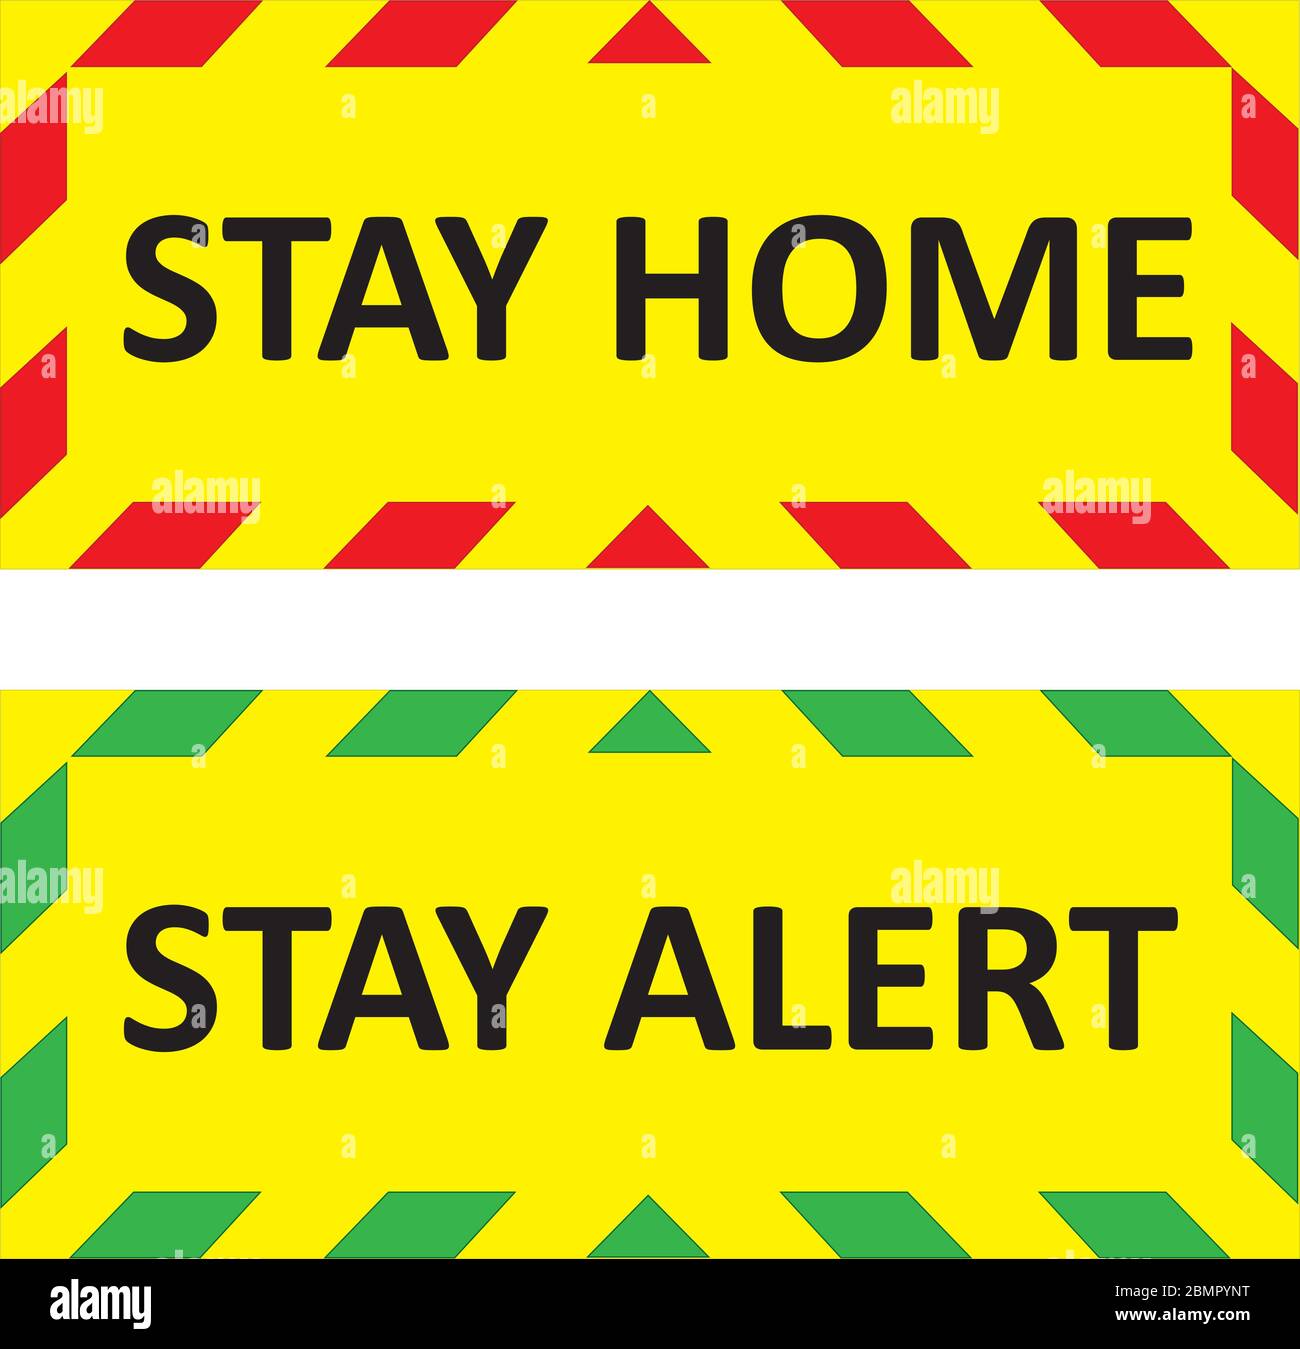 STAY HOME and STAY ALERT warning signs. Red and green quarantine signs that help to battle against Covid-19 in the United Kingdom. Vector illustration Stock Vector